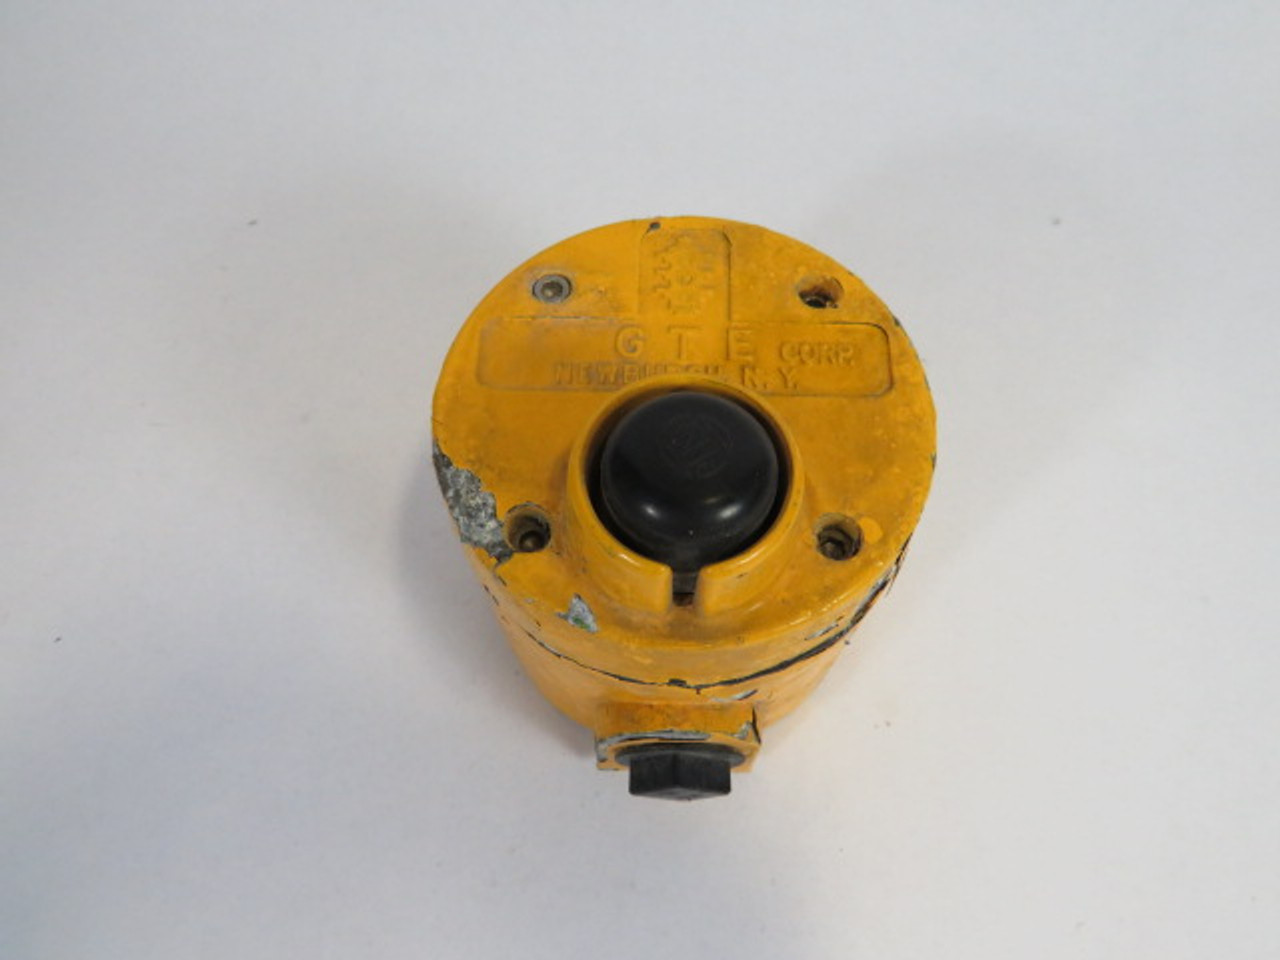 GTE Corp. PB-3-1000 Yellow Pedestrian Push Button USED